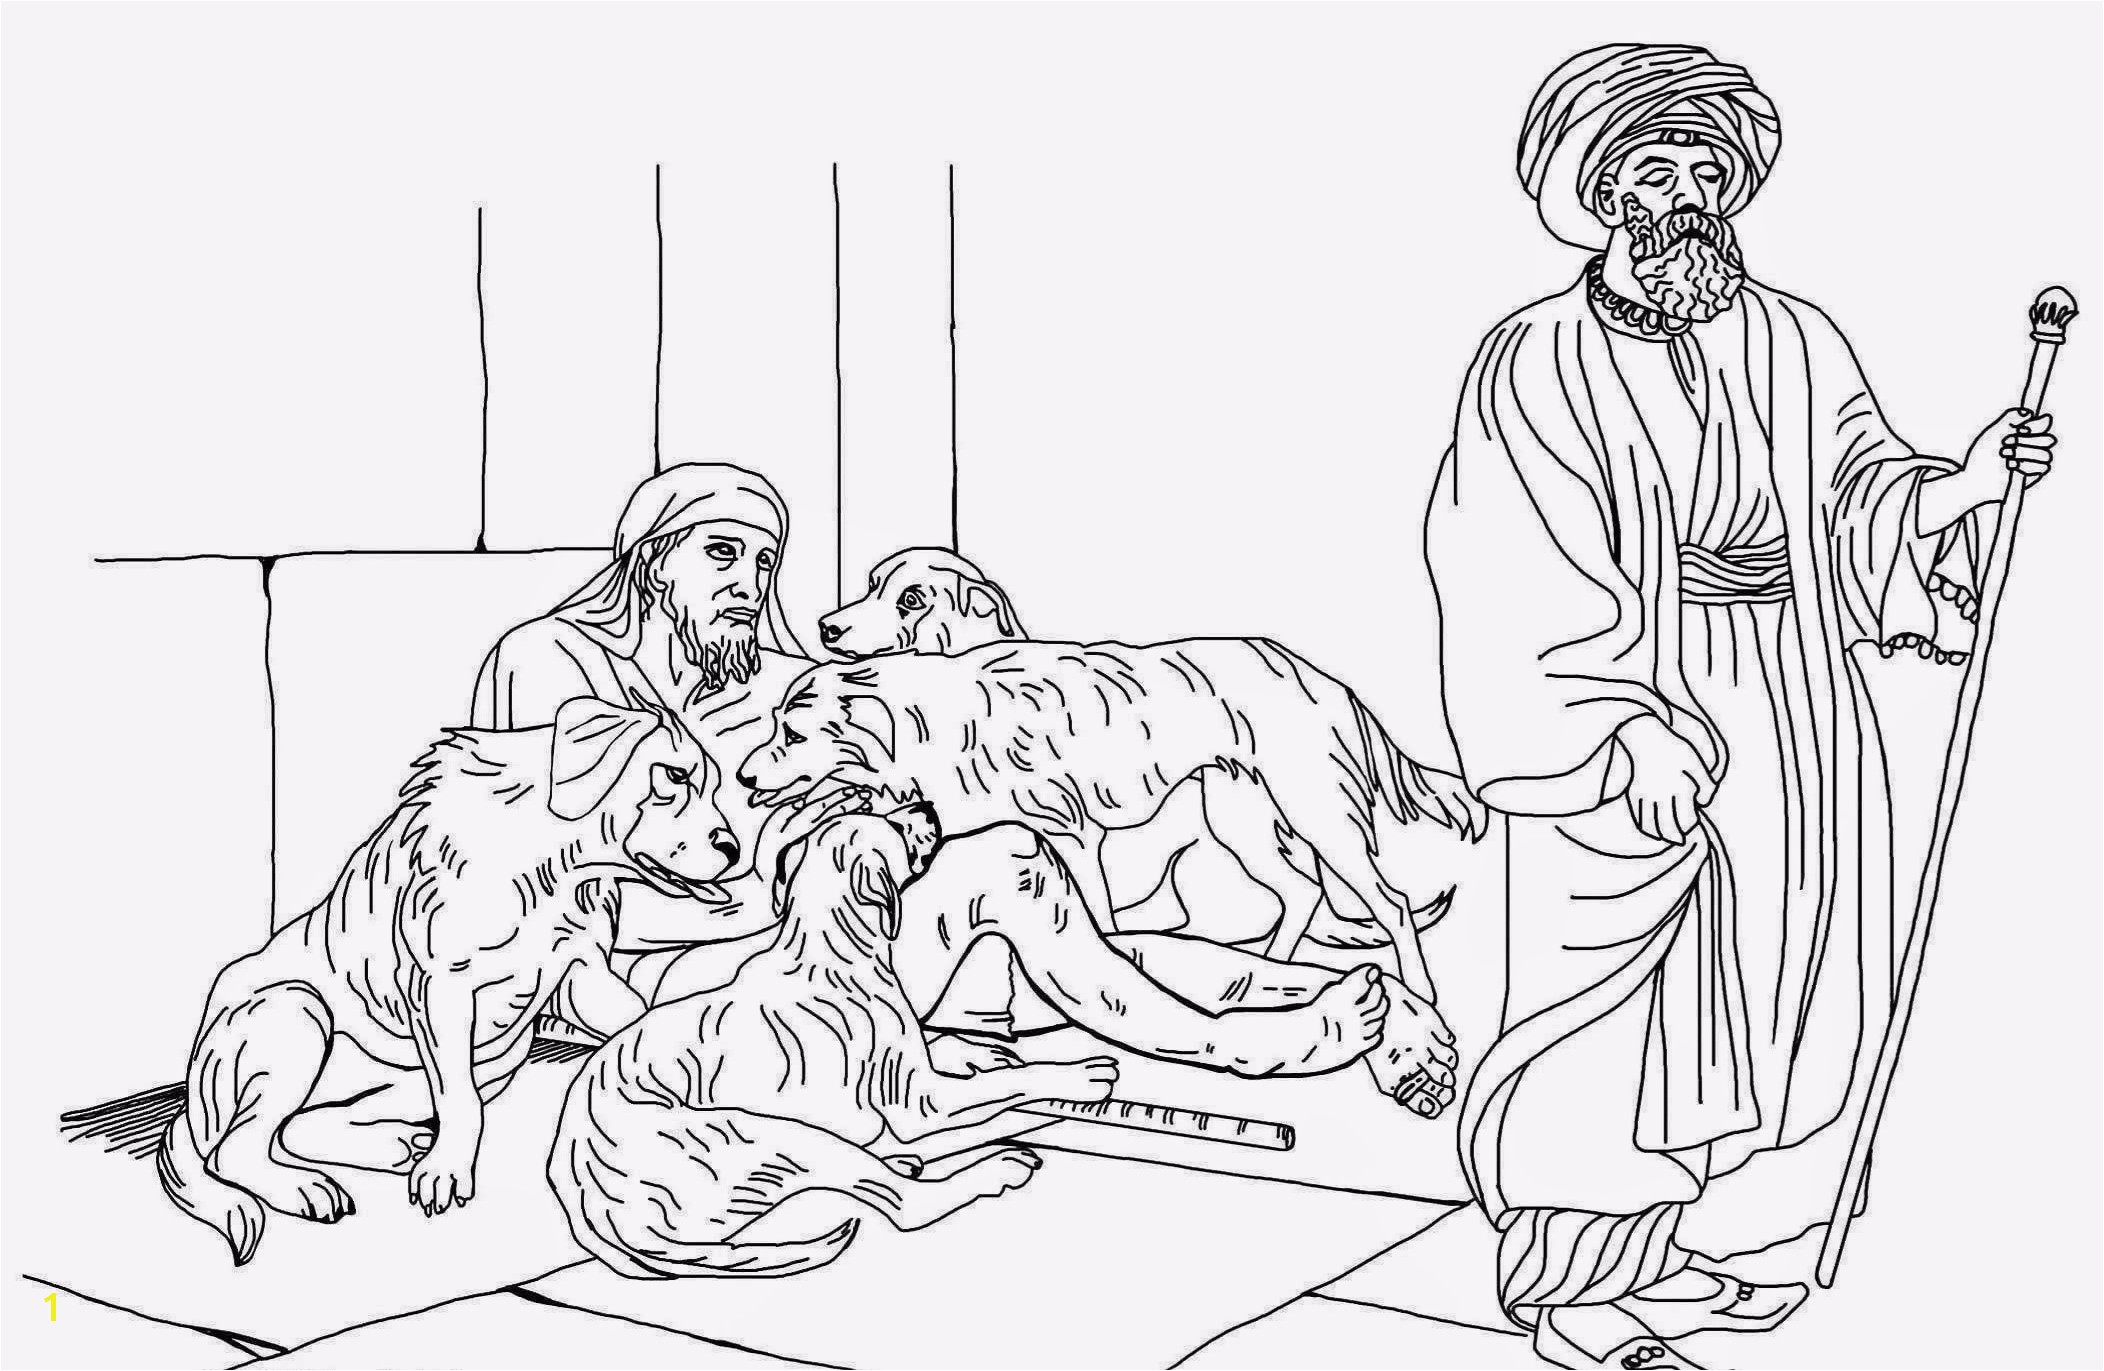 Rich Man and Lazarus Coloring Page Unique Lazarus Coloring Page Perfect Ideas Beautiful Rich Man and